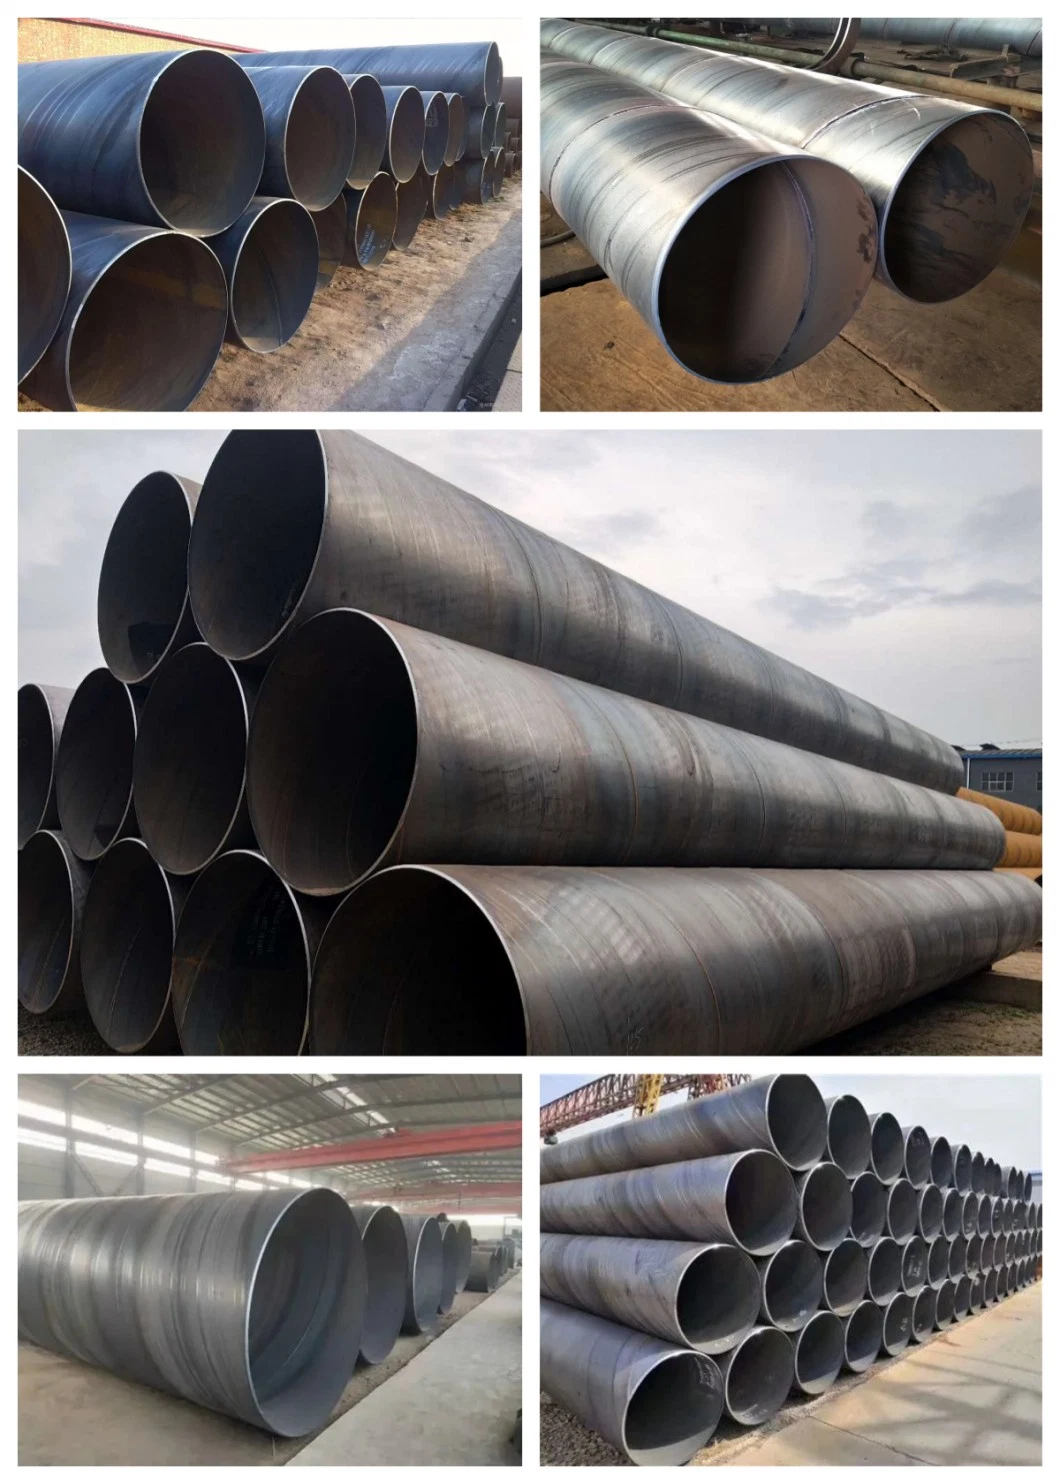 Spiral Welded Pipe Helical Welded Pipe Spiral Steel Pipe As1163 /C350/API /5CT Pipe Good Weldability High Dimensional Accuracy Pipe